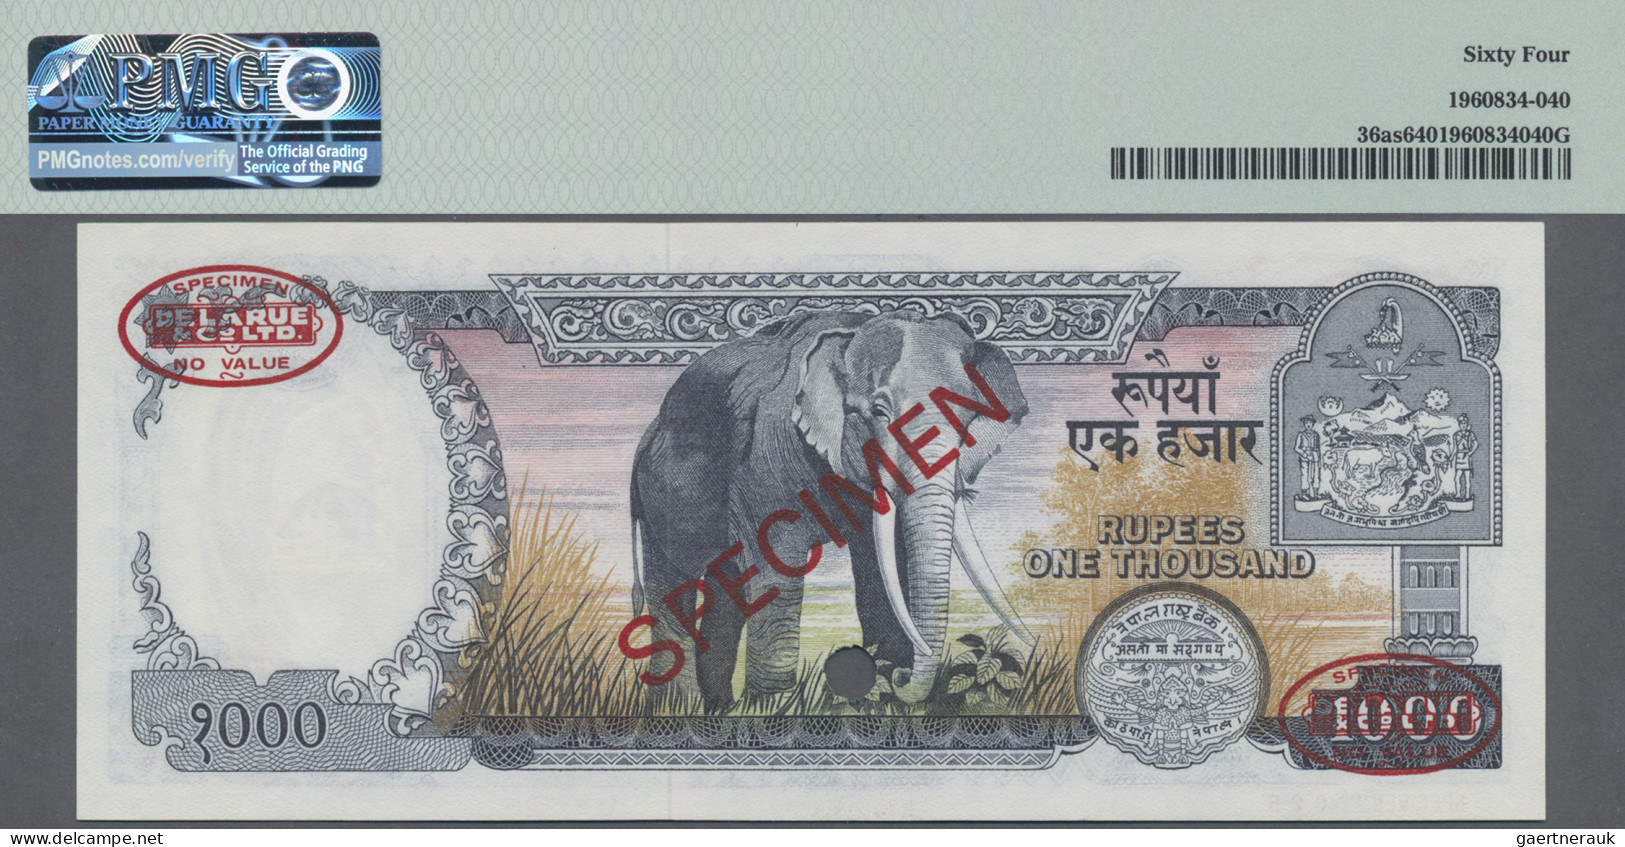 Nepal: Nepal Rastra Bank, 1.000 Rupees ND(1981) SPECIMEN, P.36as With Signature: - Nepal